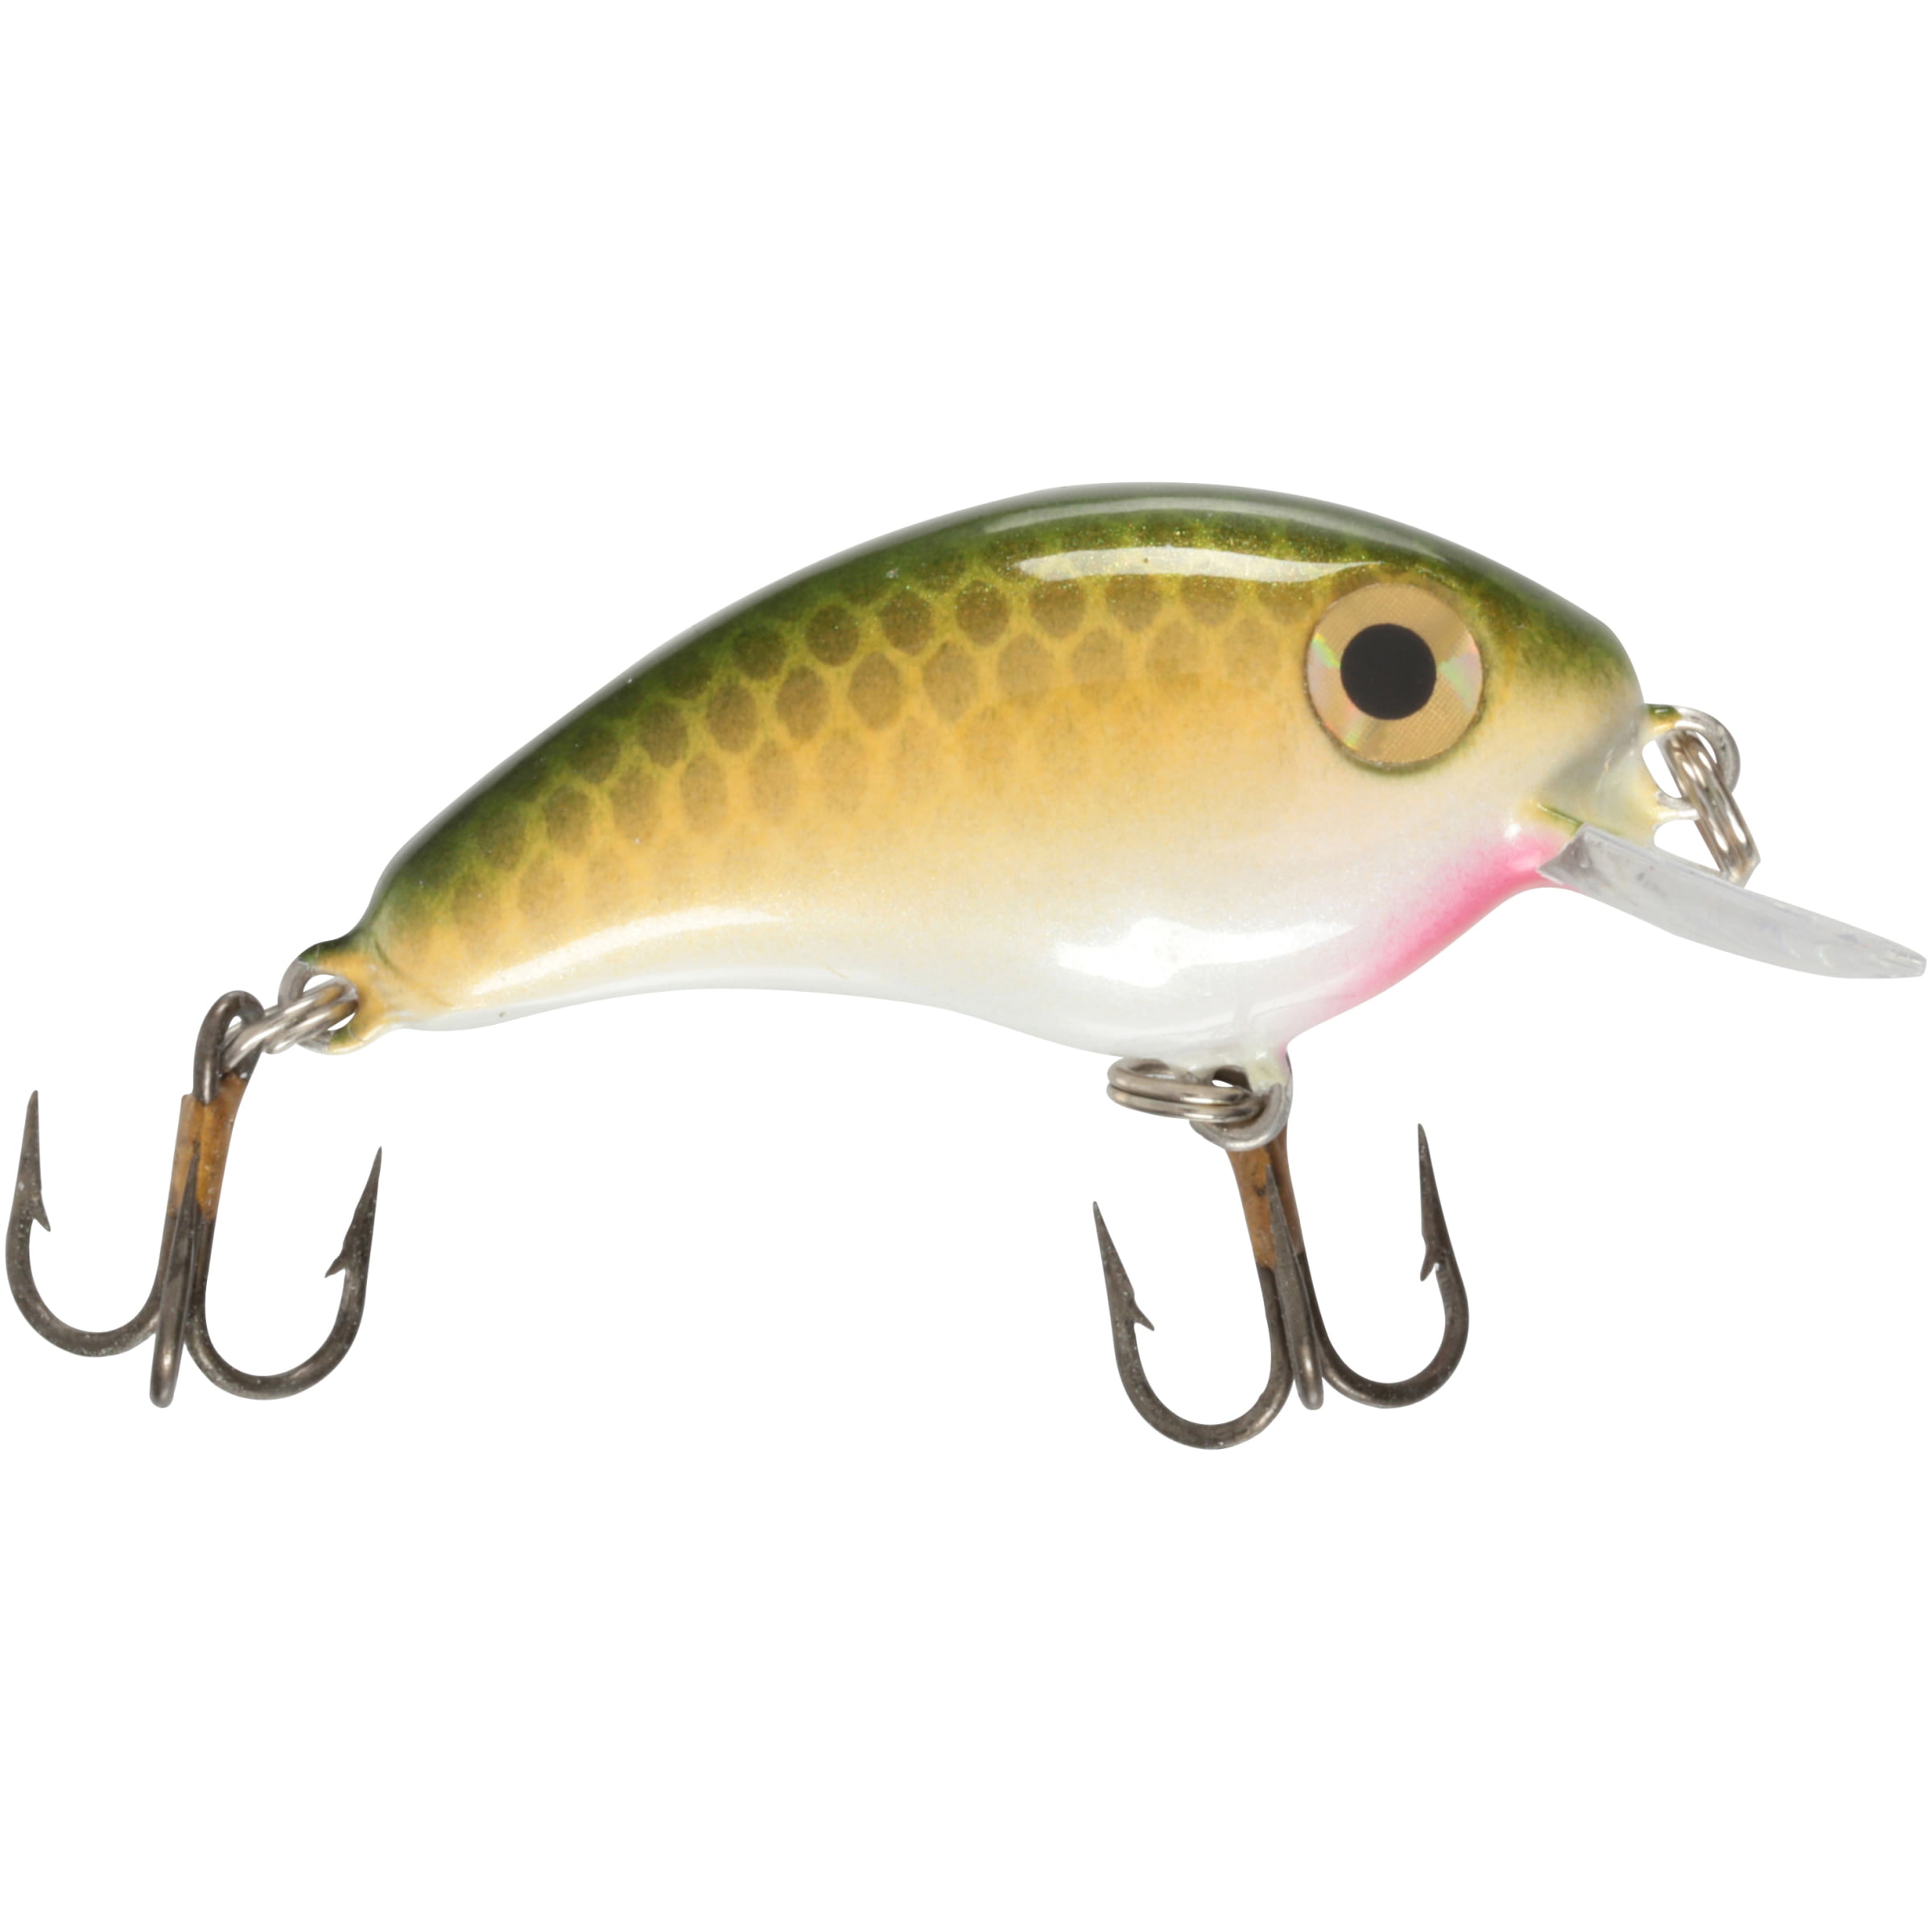 This Tiny Lure catches EVERYTHING! Strike King Bitsy Minnow is Undeafeated  